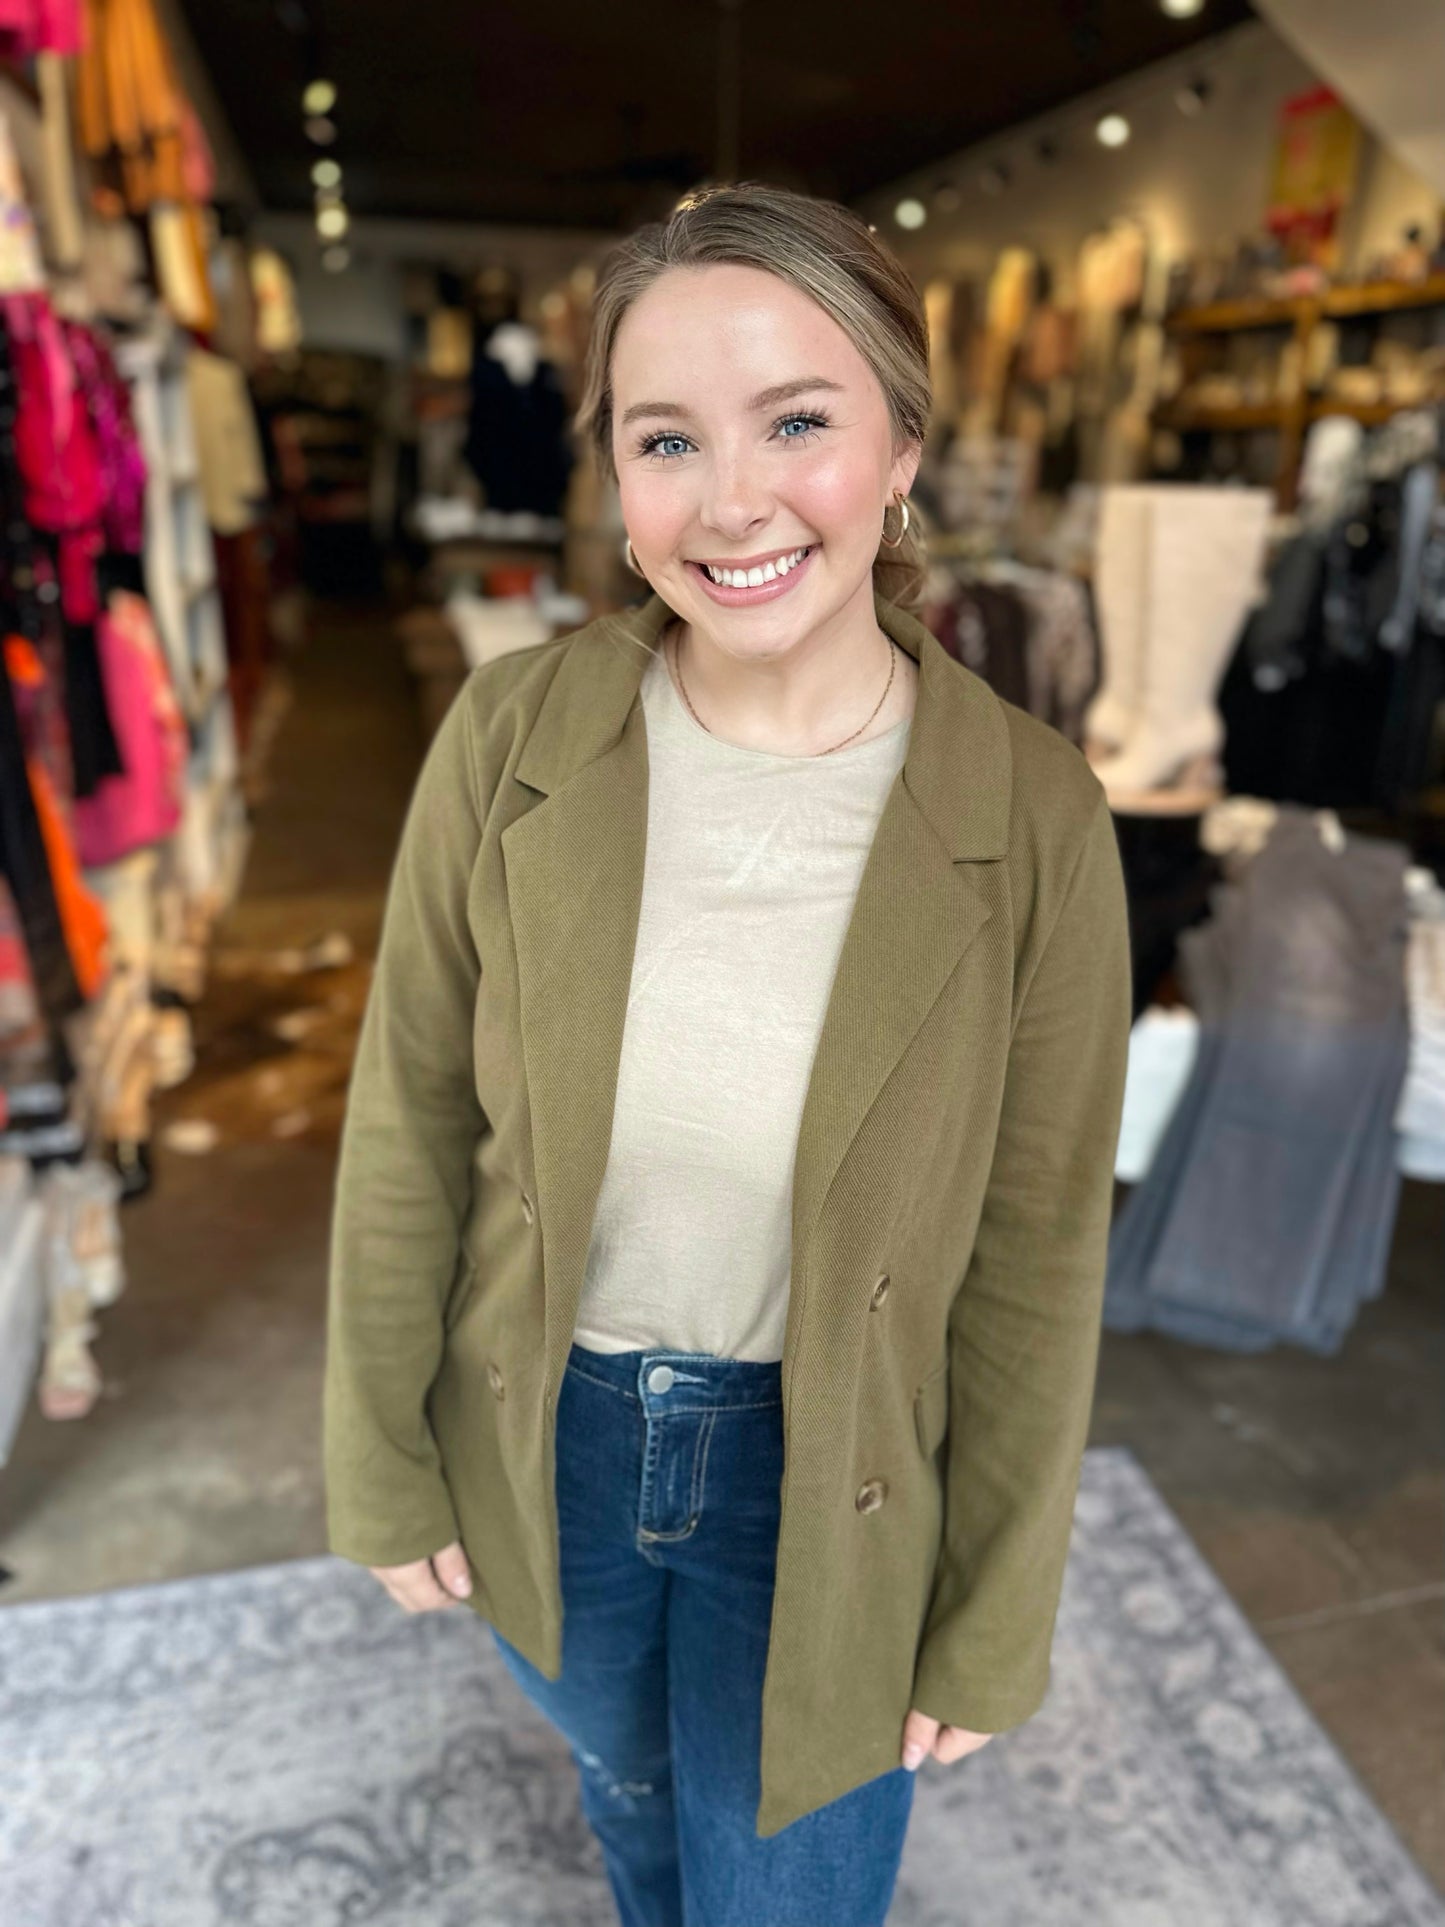 Cece Double Breasted Blazer in Warm Olive